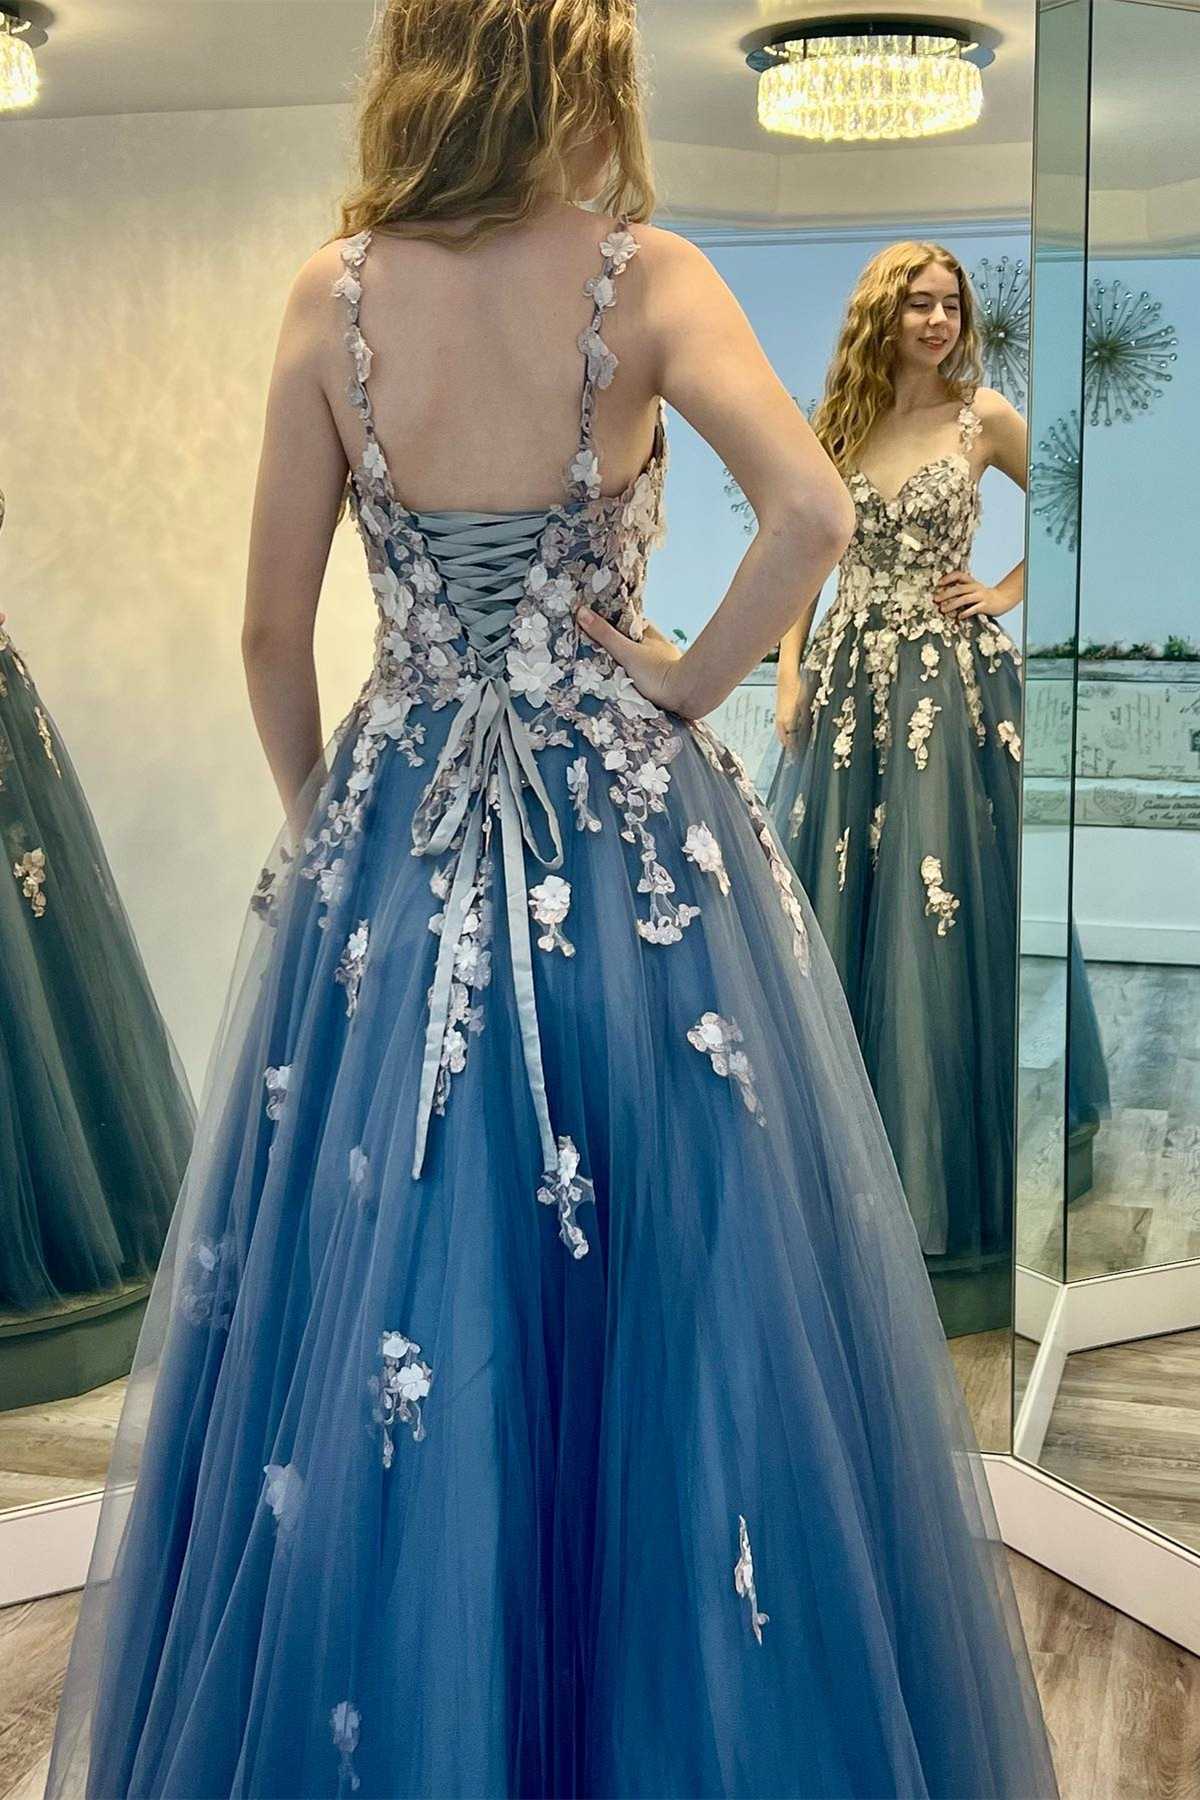 3D Floral Lace Sweetheart Lace-Up Back A-Line Prom Dress